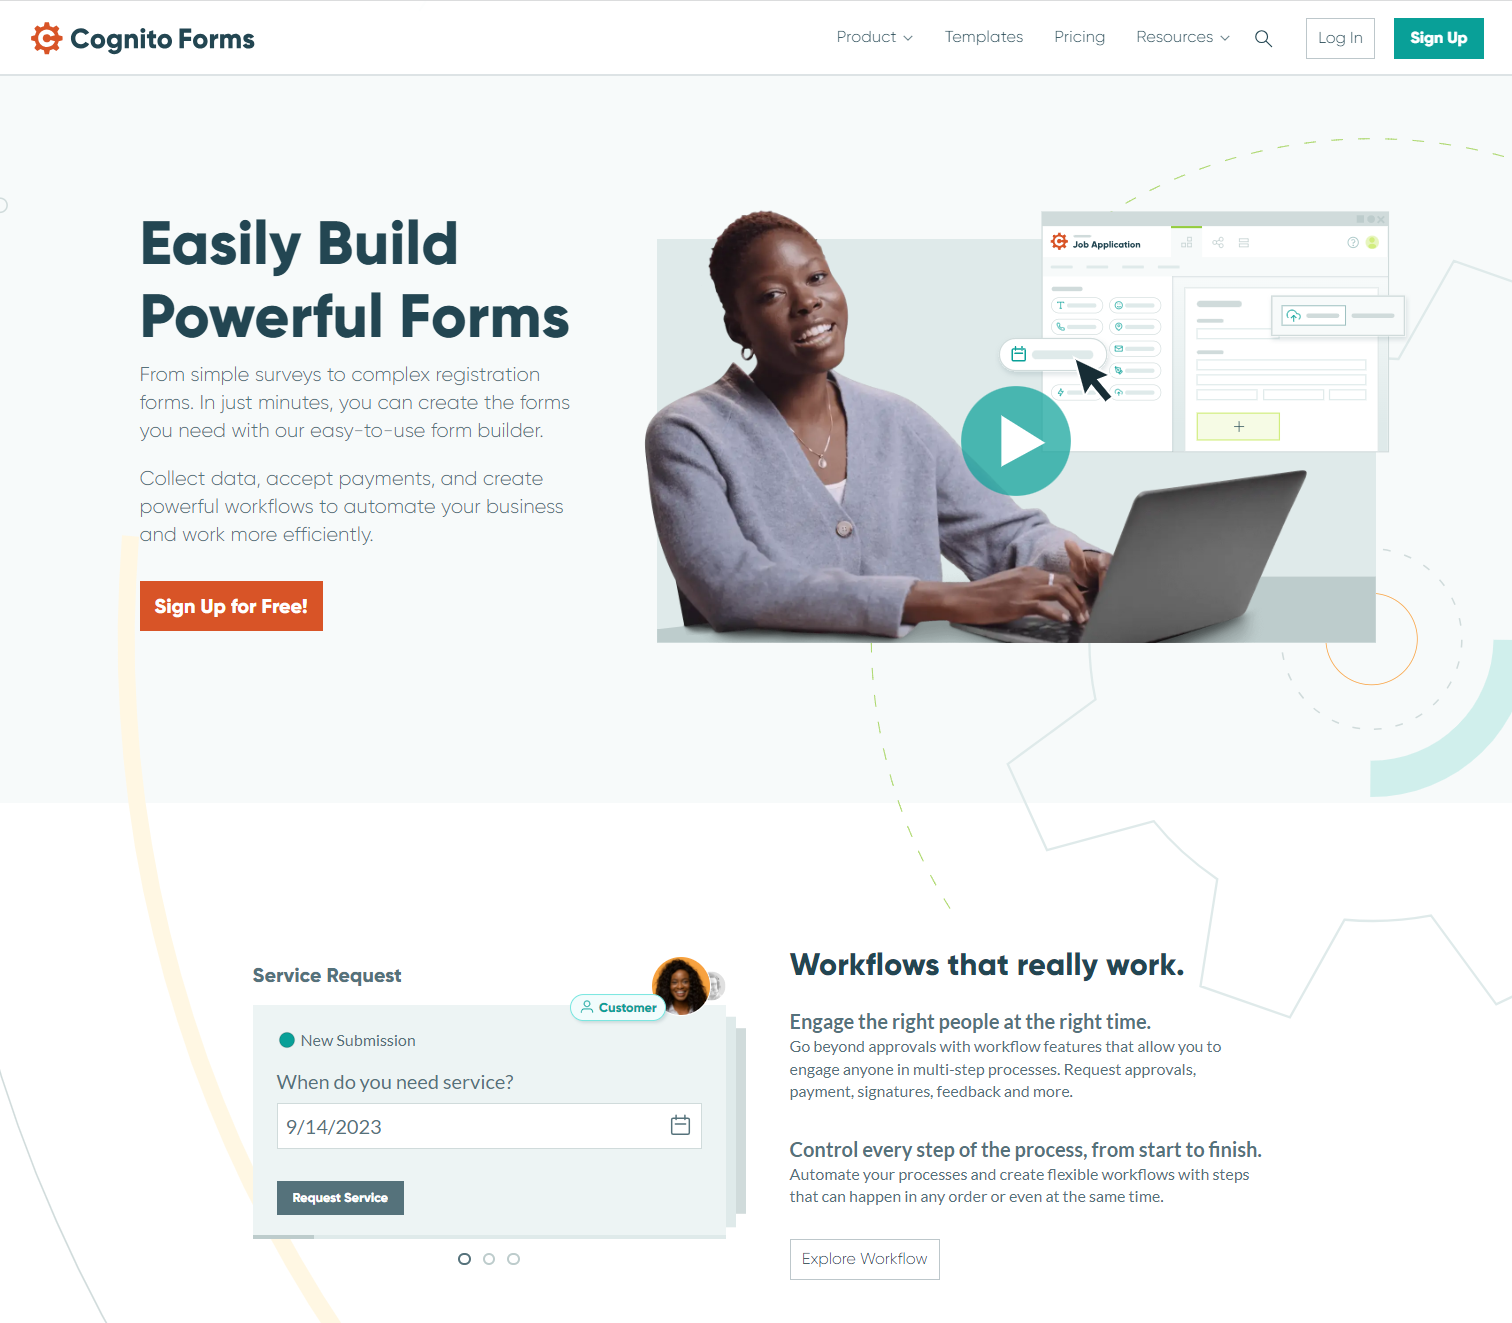 Easily Build Powerful Forms | From simple surveys to complex registration forms. You can create the forms you need in just minutes with our easy-to-use form builder.  Collect data, accept payments, and create powerful workflows to automate your business.